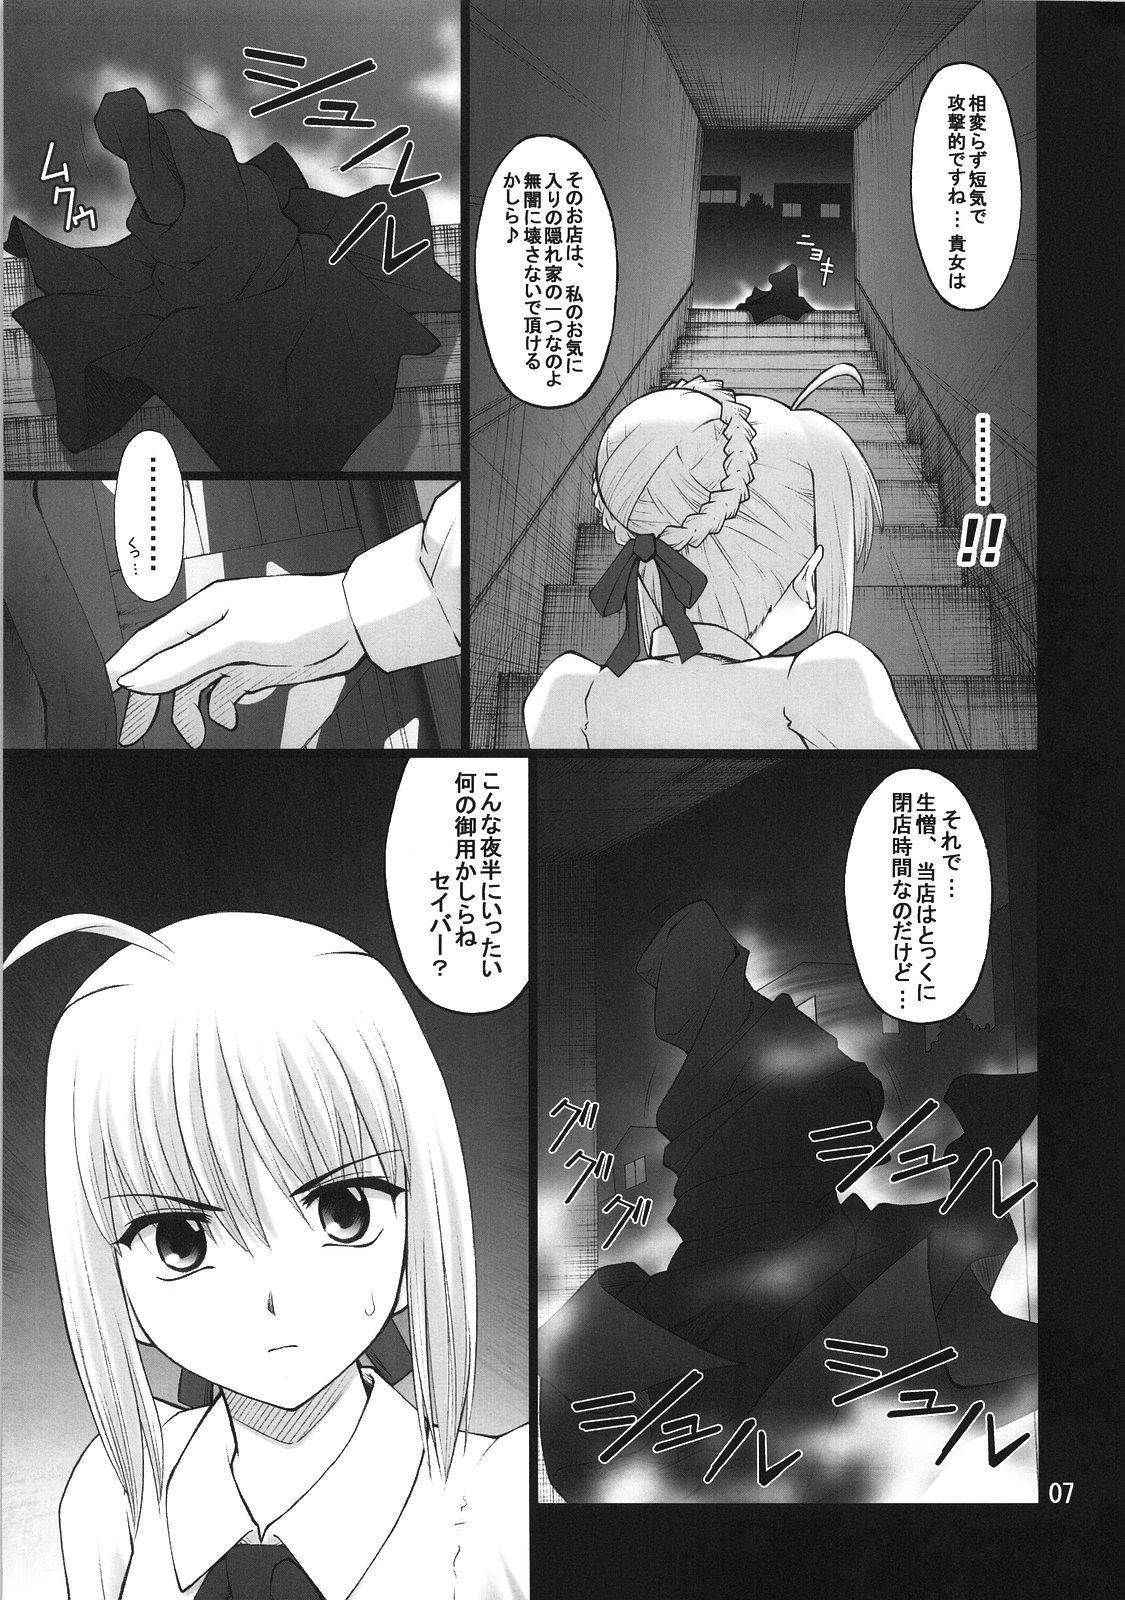 Russia Grem-Rin 3 - Fate stay night Fate hollow ataraxia Gostosa - Page 6